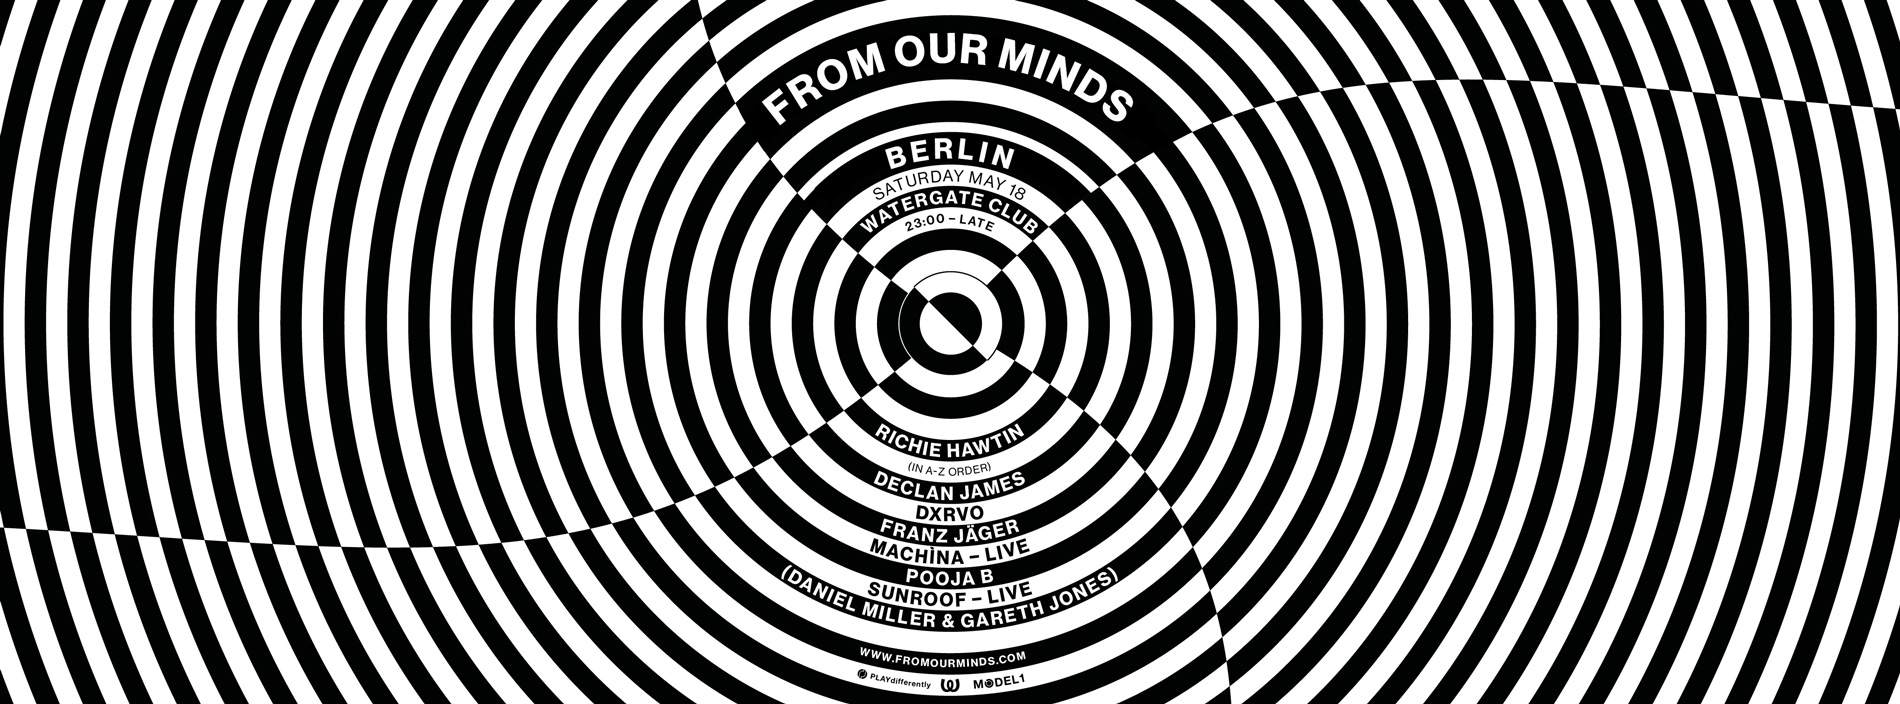 FROM OUR MINDS / Richie Hawtin - フライヤー表